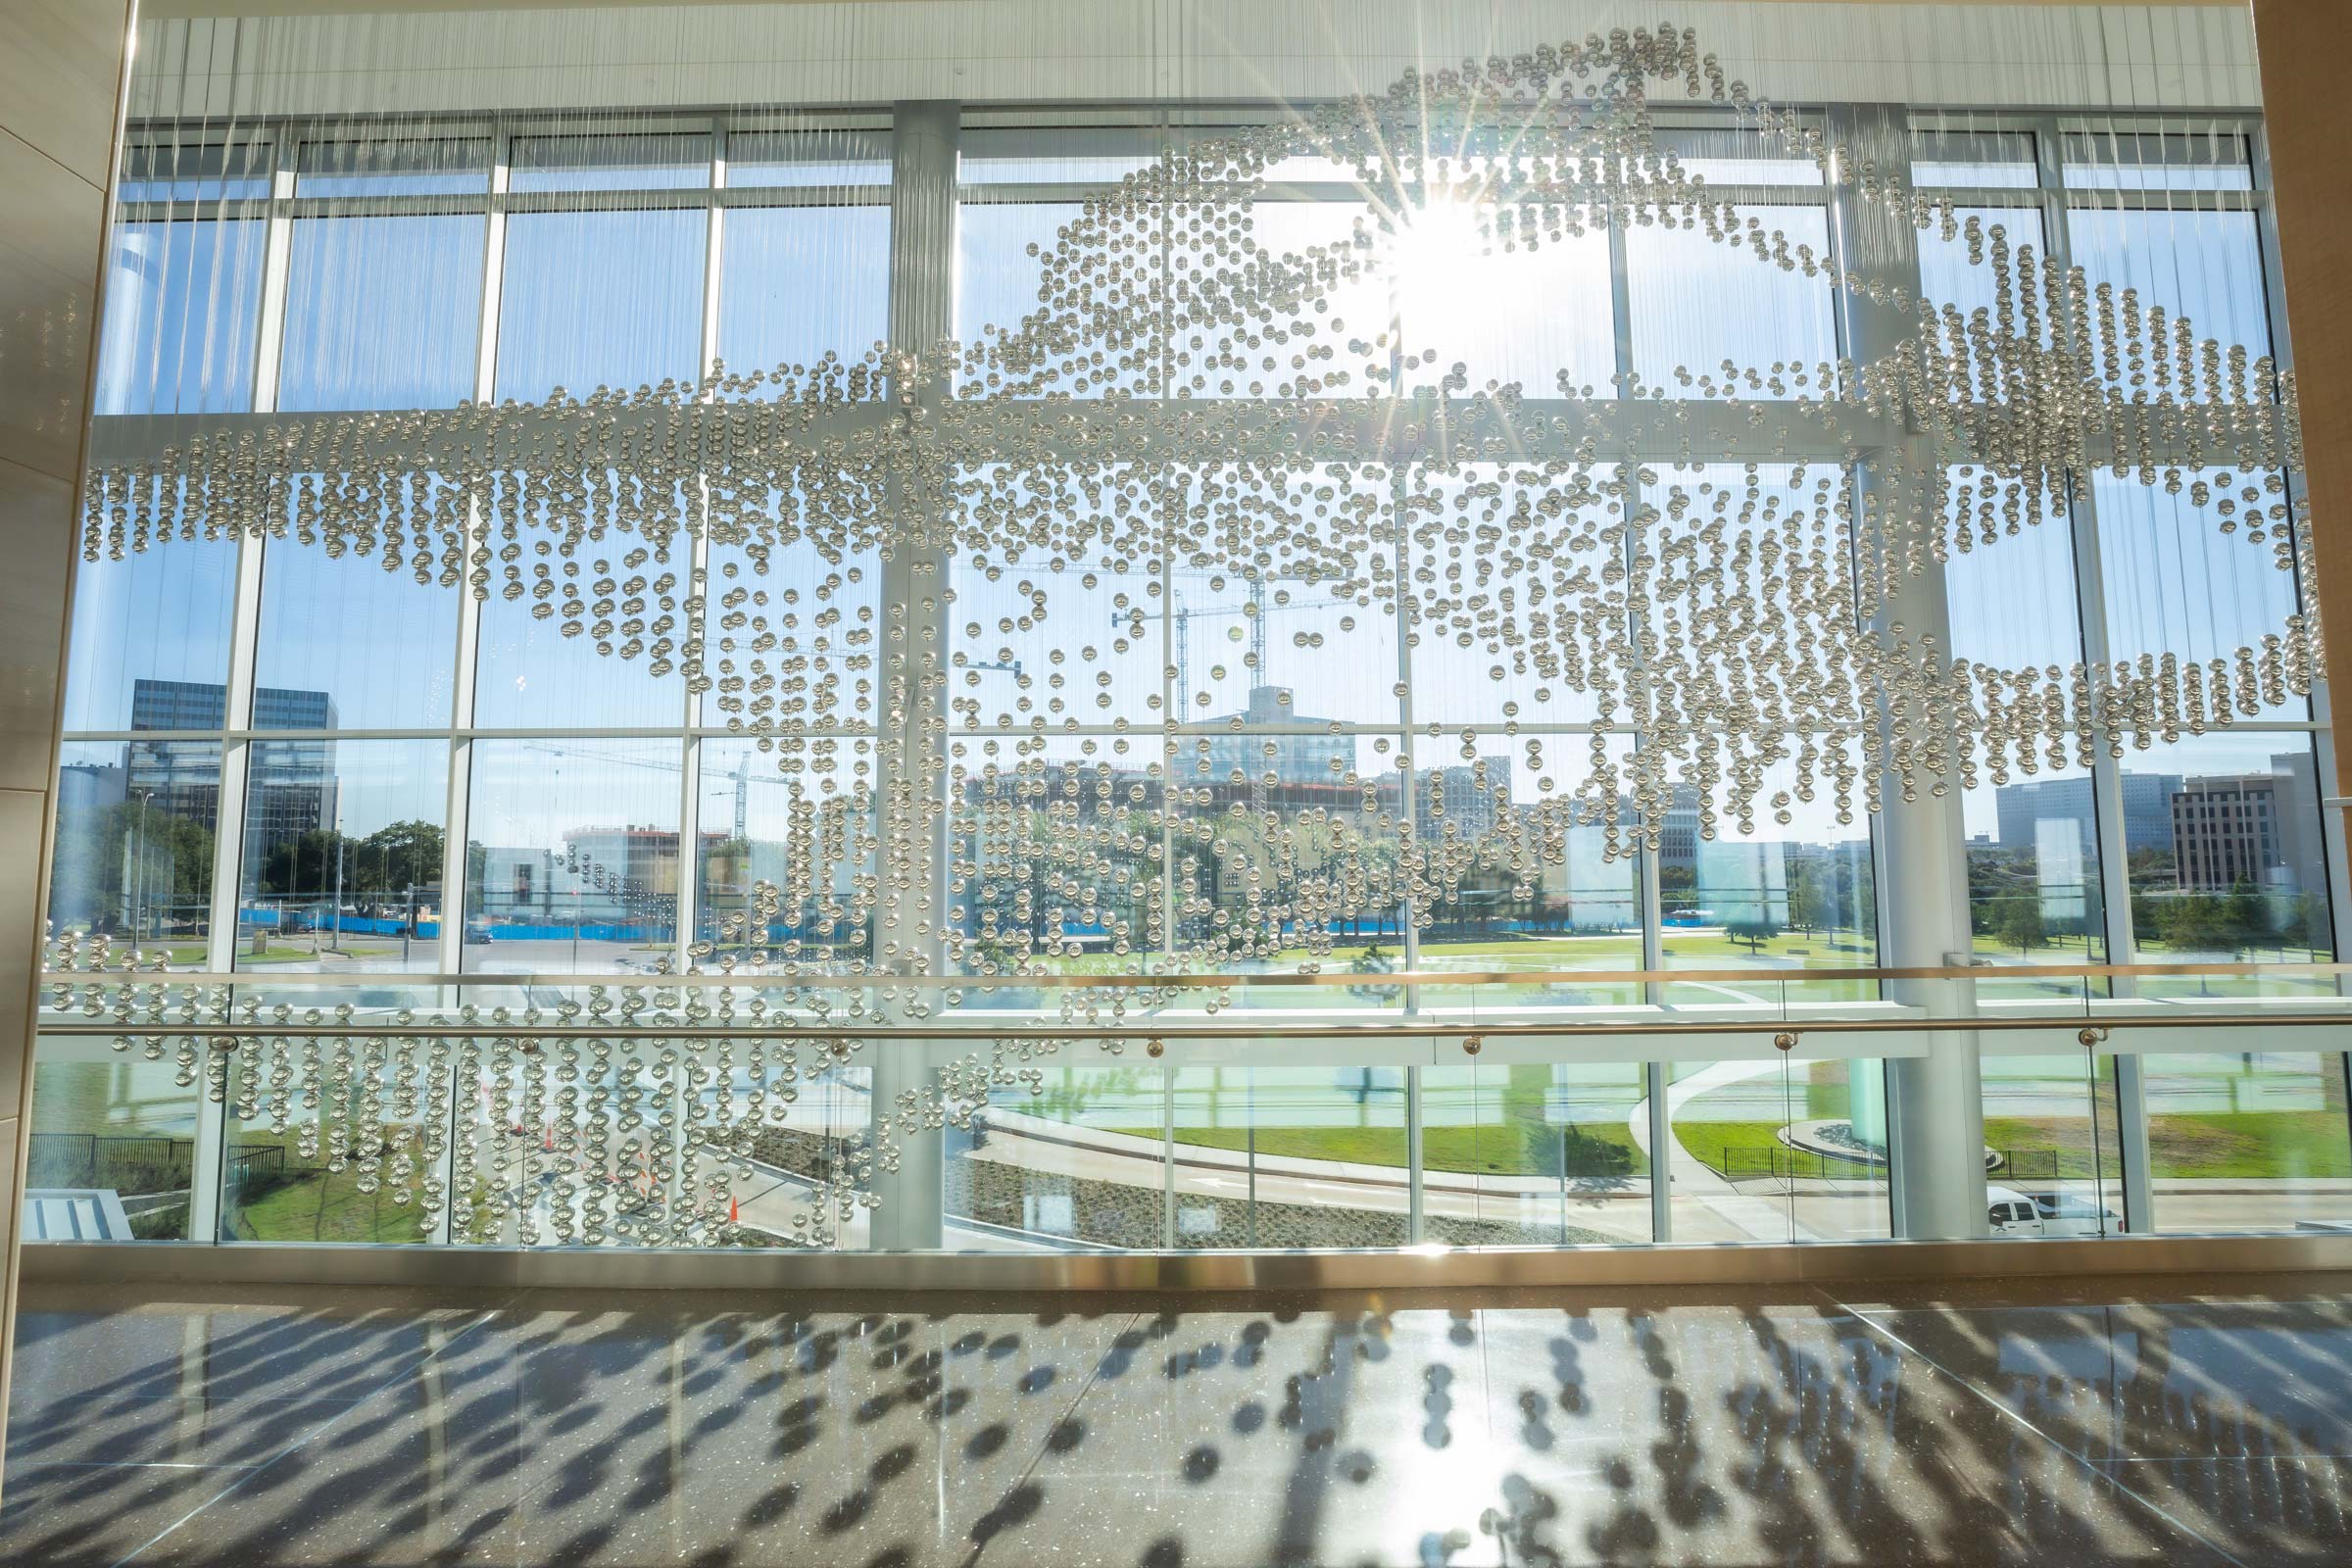 Sculpture made up of thousands of reflective steel balls hung from thin steel wires.